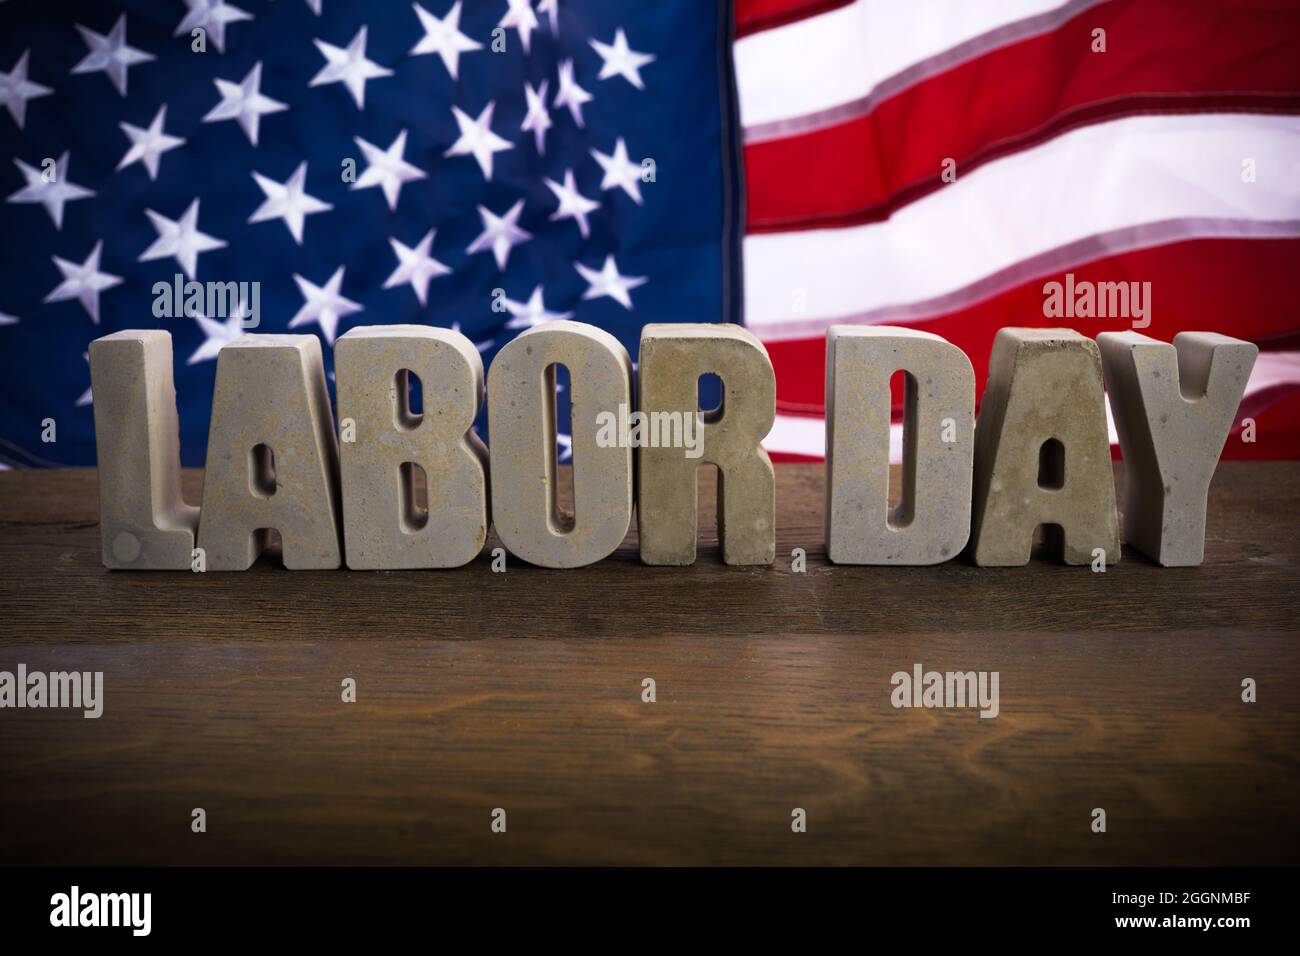 Happy Labor Day banner. USA flag and letters on rustic wooden background. Stock Photo